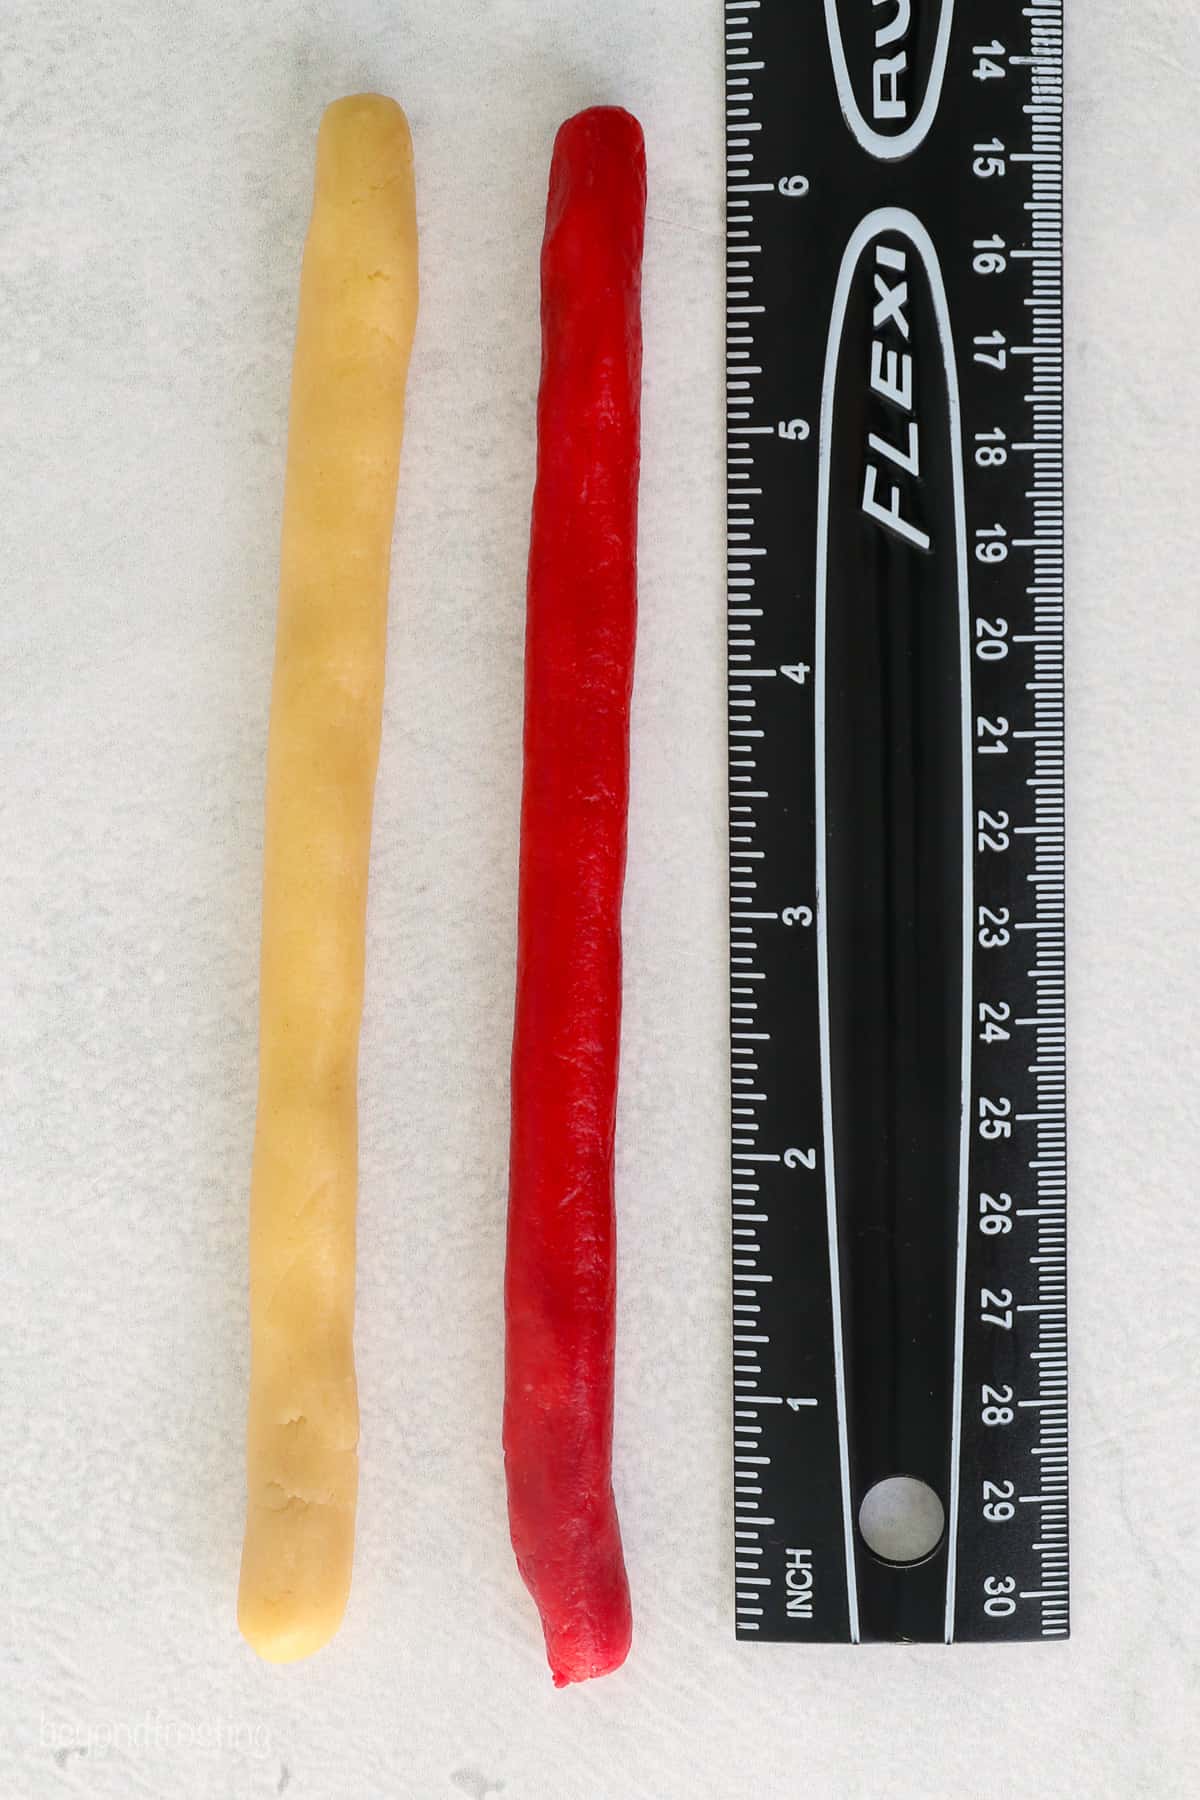 White and red sugar cookie dough ropes lined up next to a black ruler.